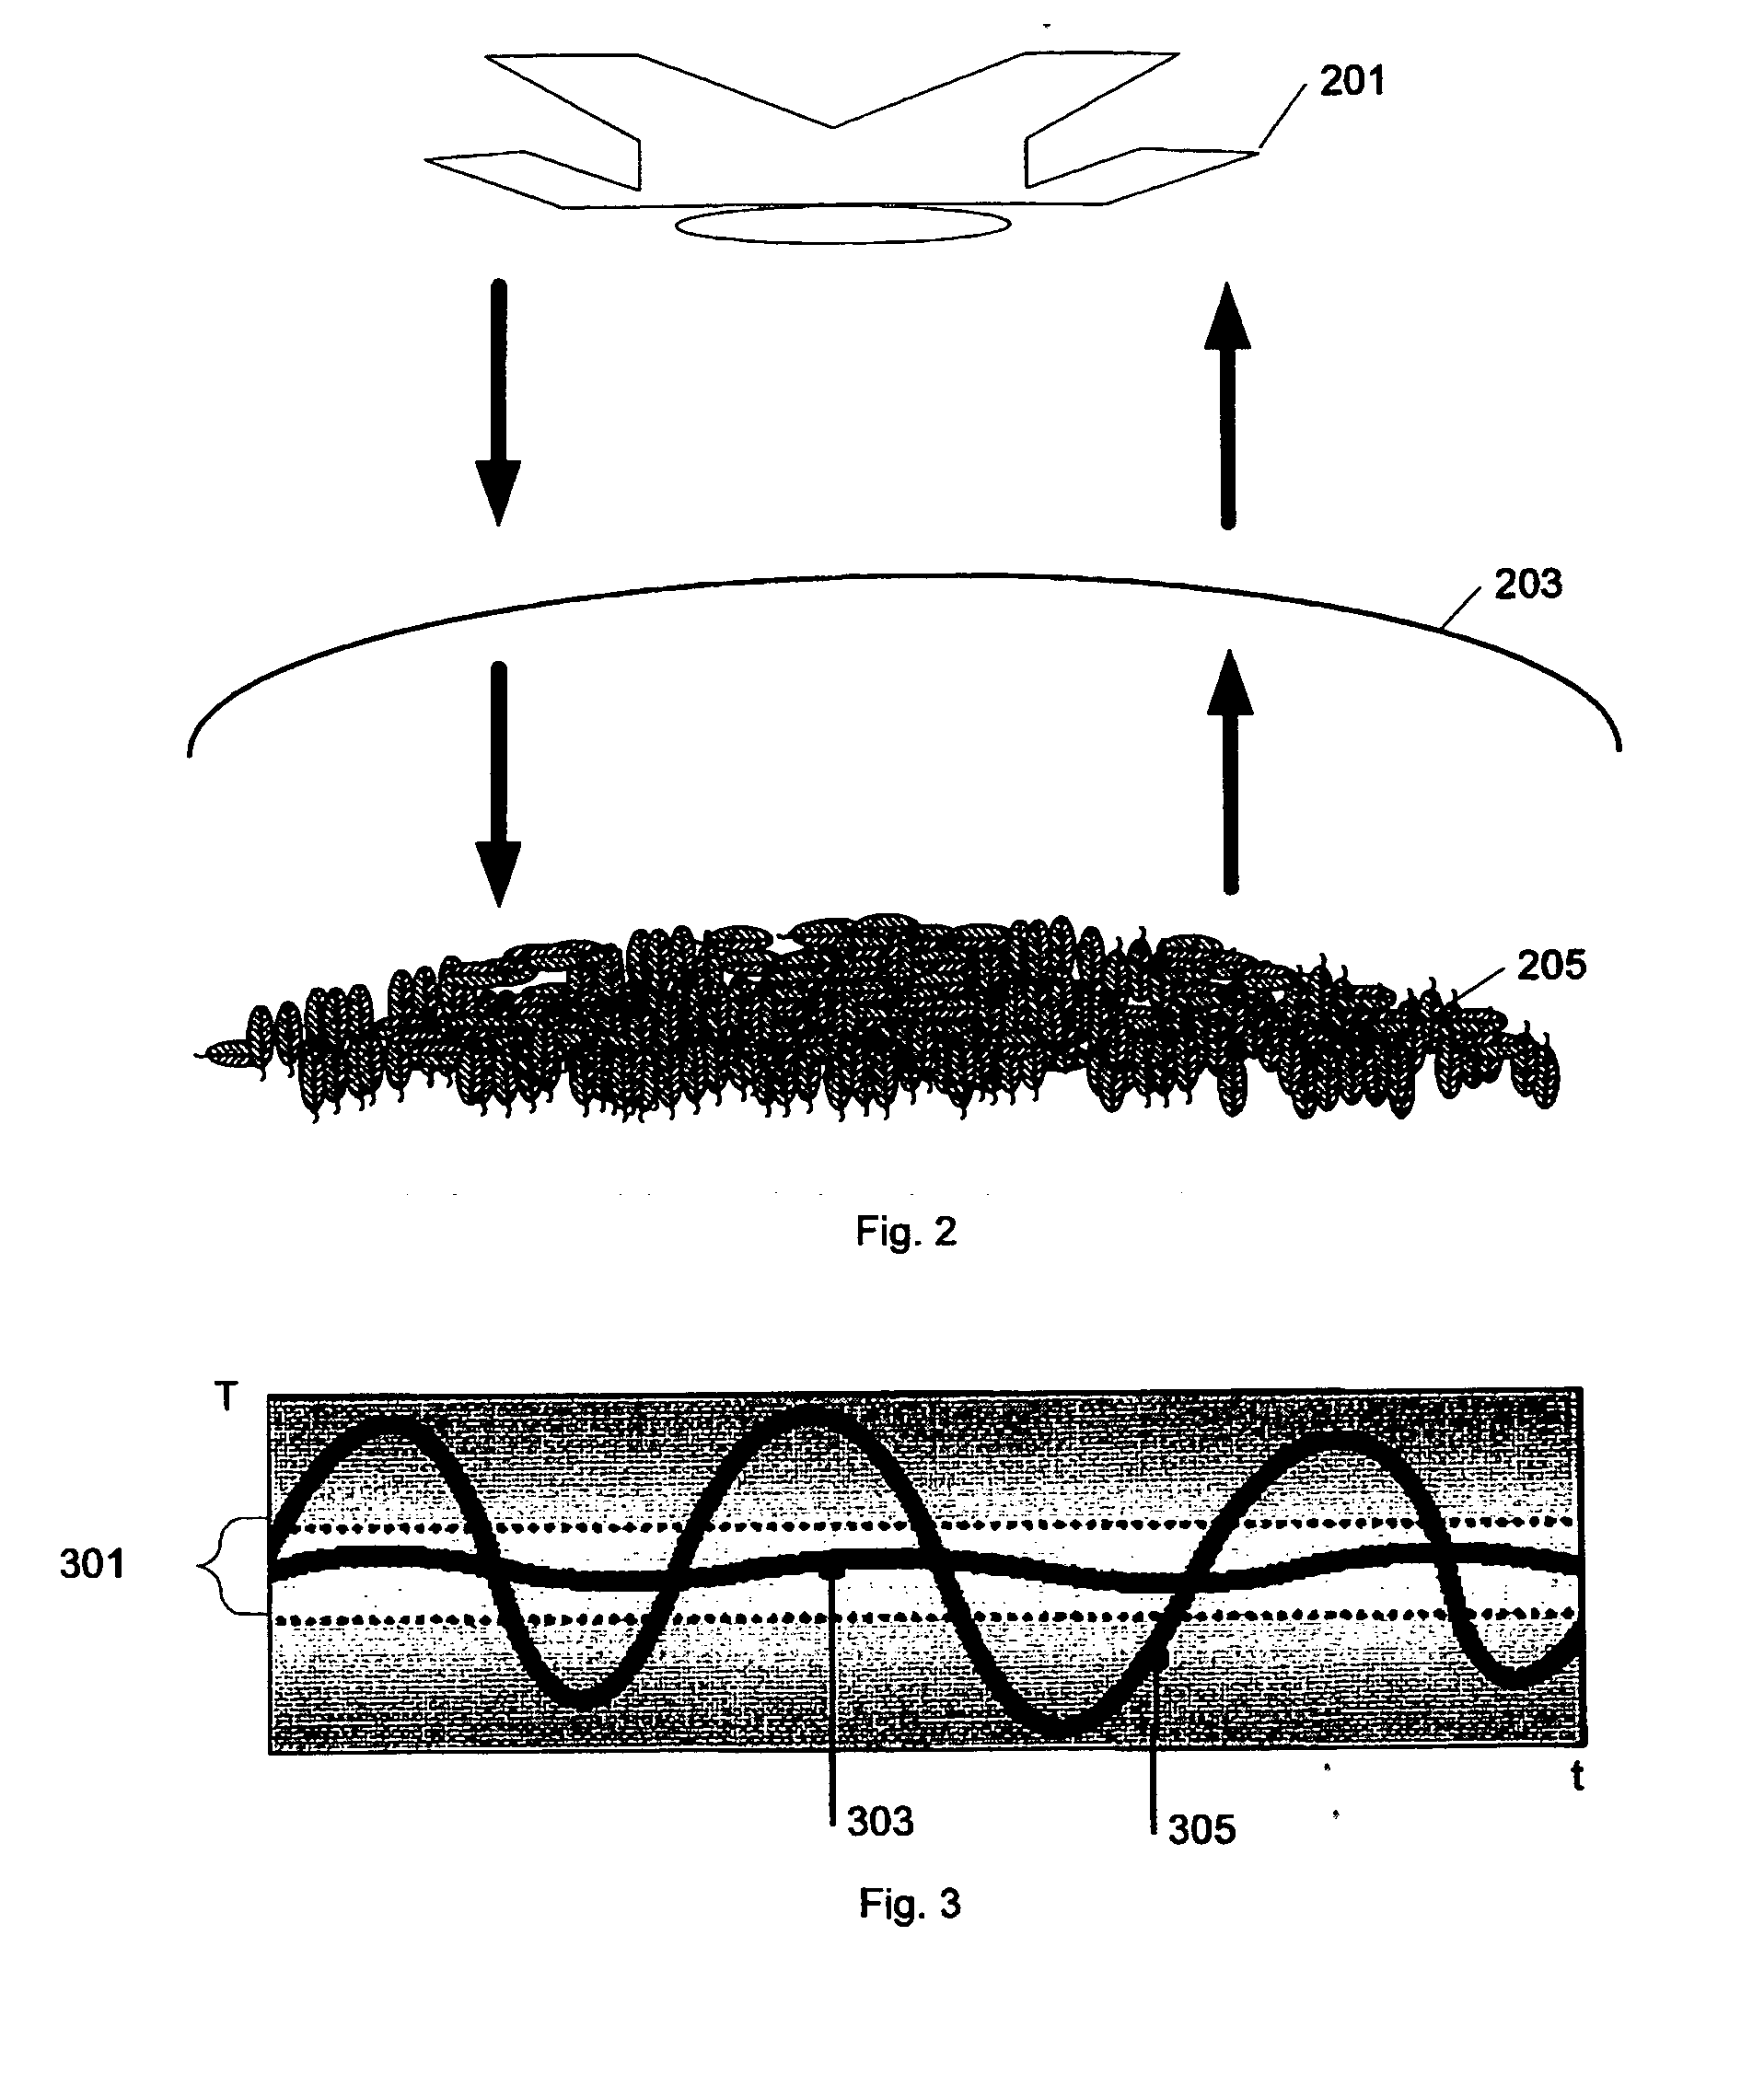 Sleeping devices comprising a combination of down filling and a temperature regulating material